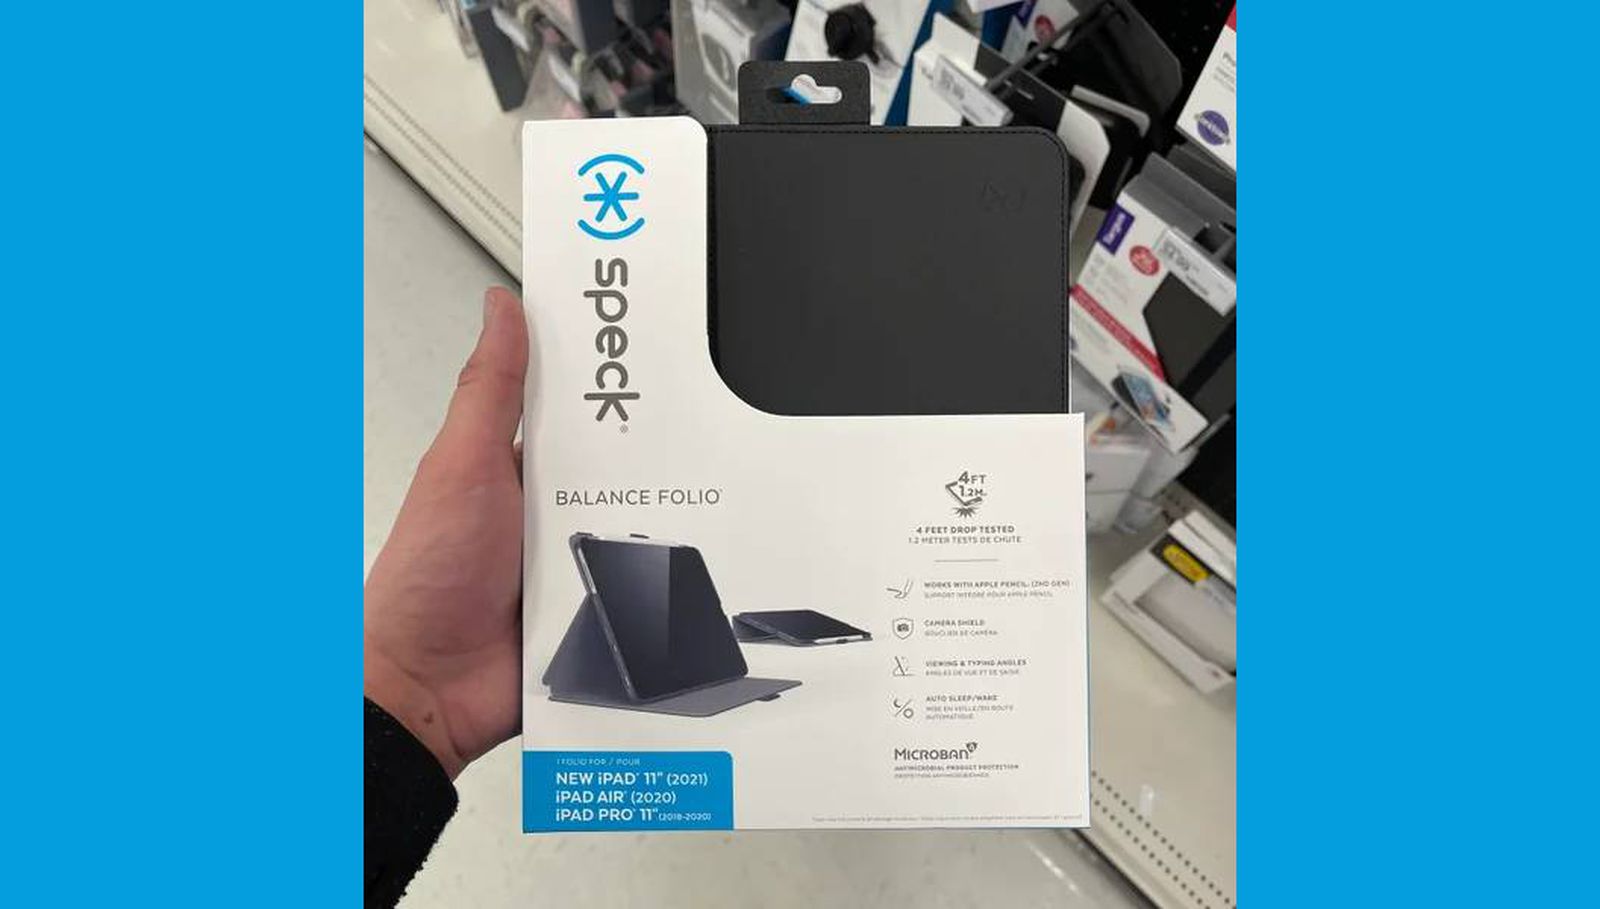 2021 iPad Pro case found at Target as rumors swirl over upcoming refreshment